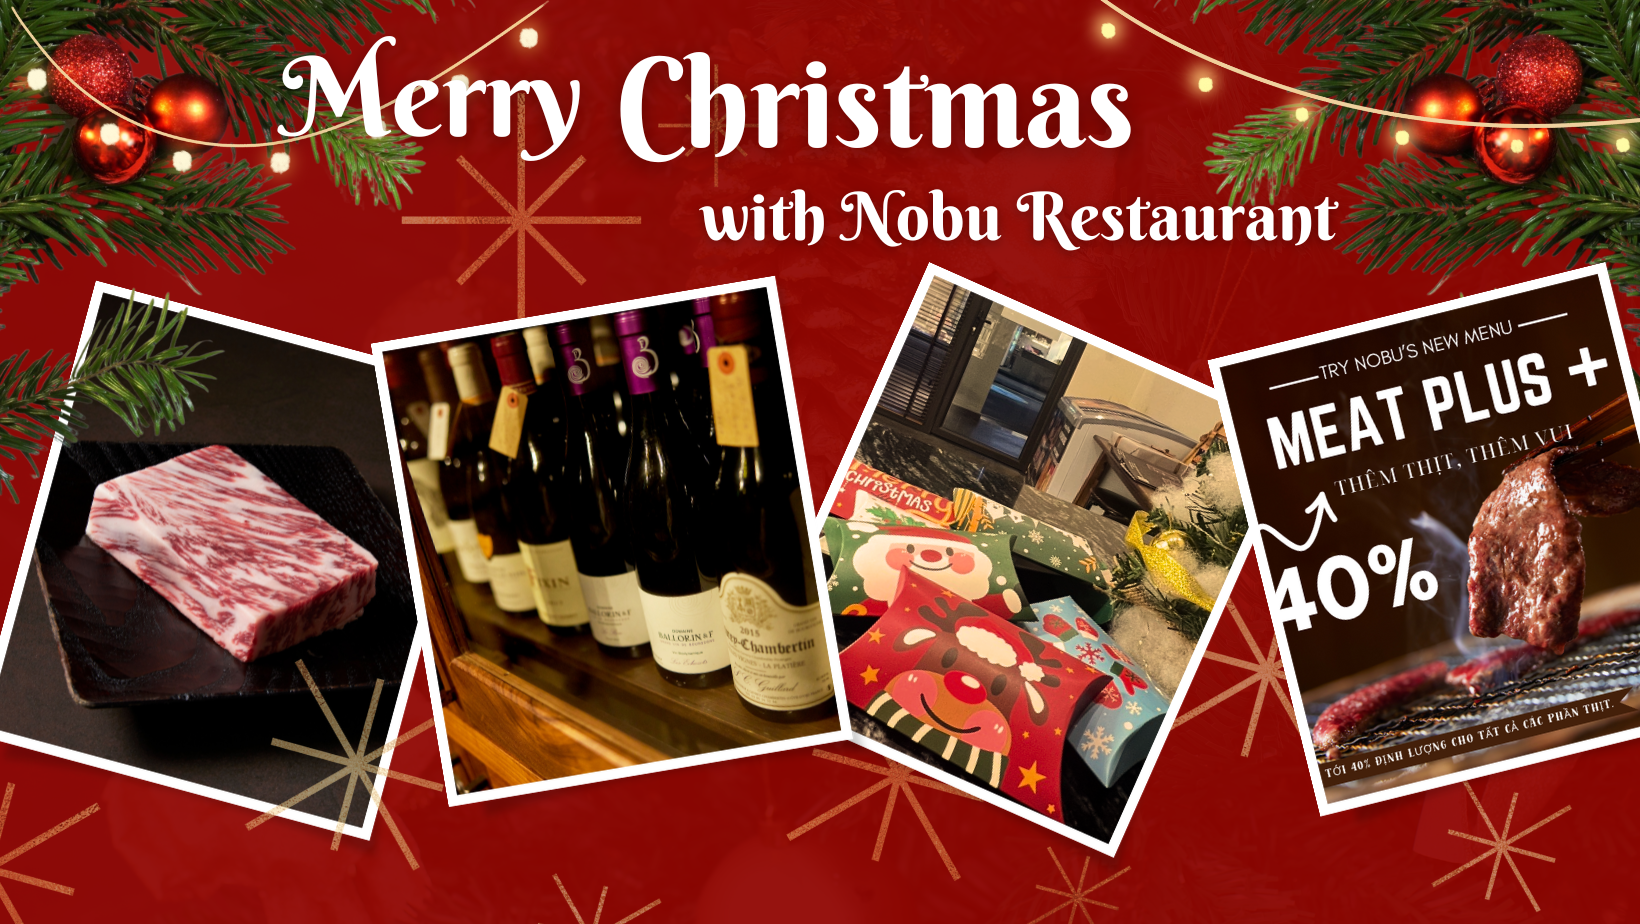 Merry Christmas and Happy New Year with Nobu Restaurant